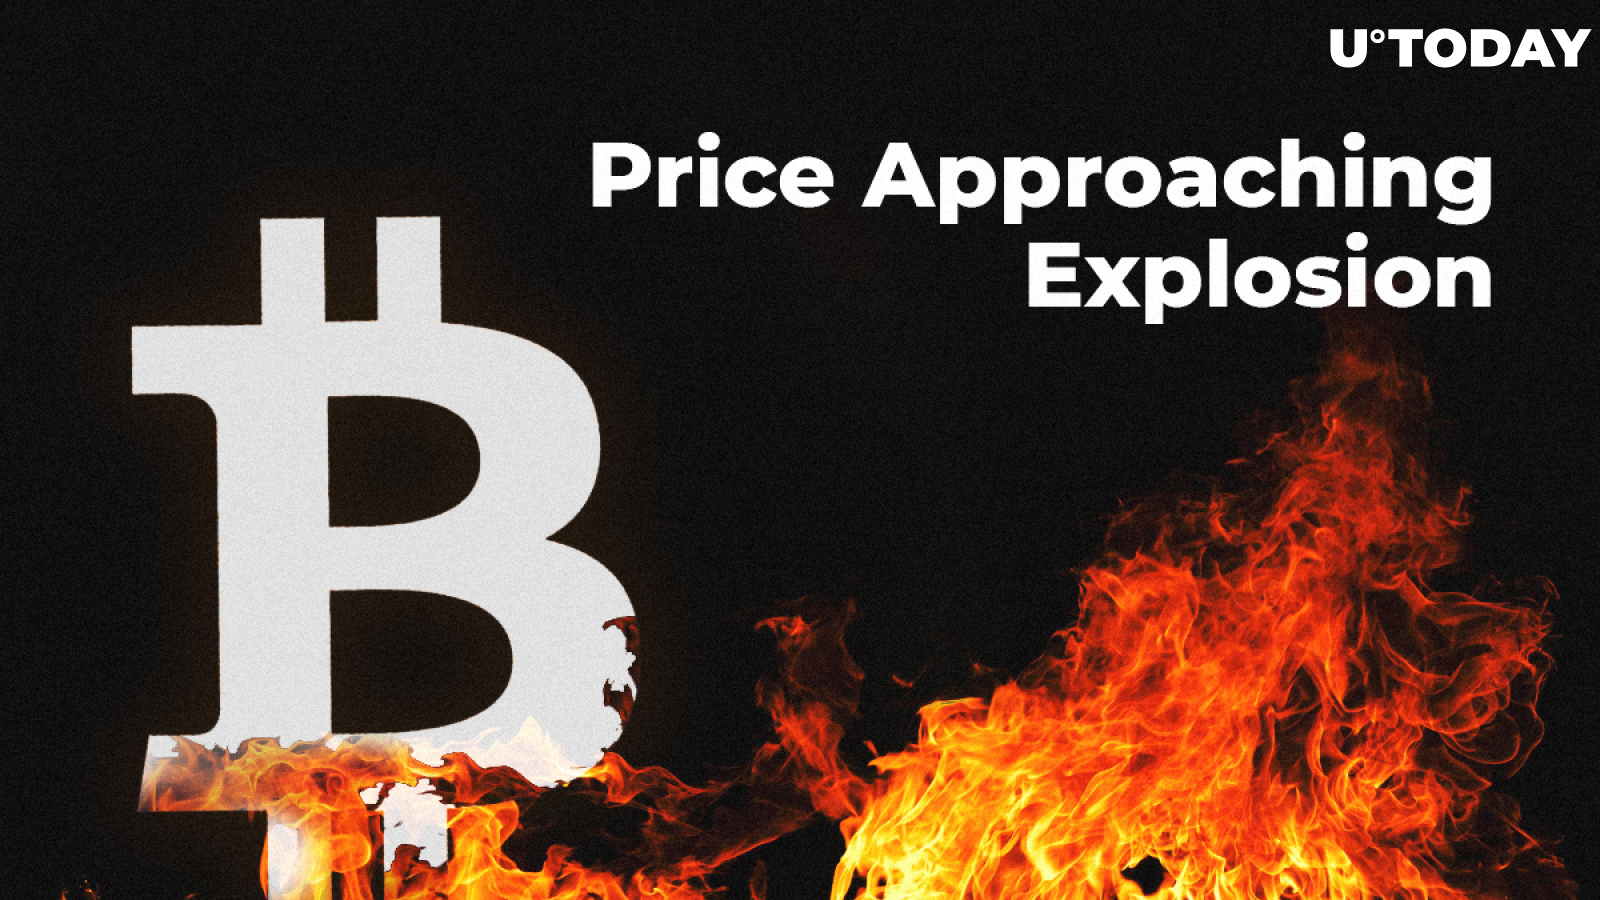 Bitcoin (BTC) Price Is Approaching an Explosion Above the $8,400 Level — What Can Activate It?